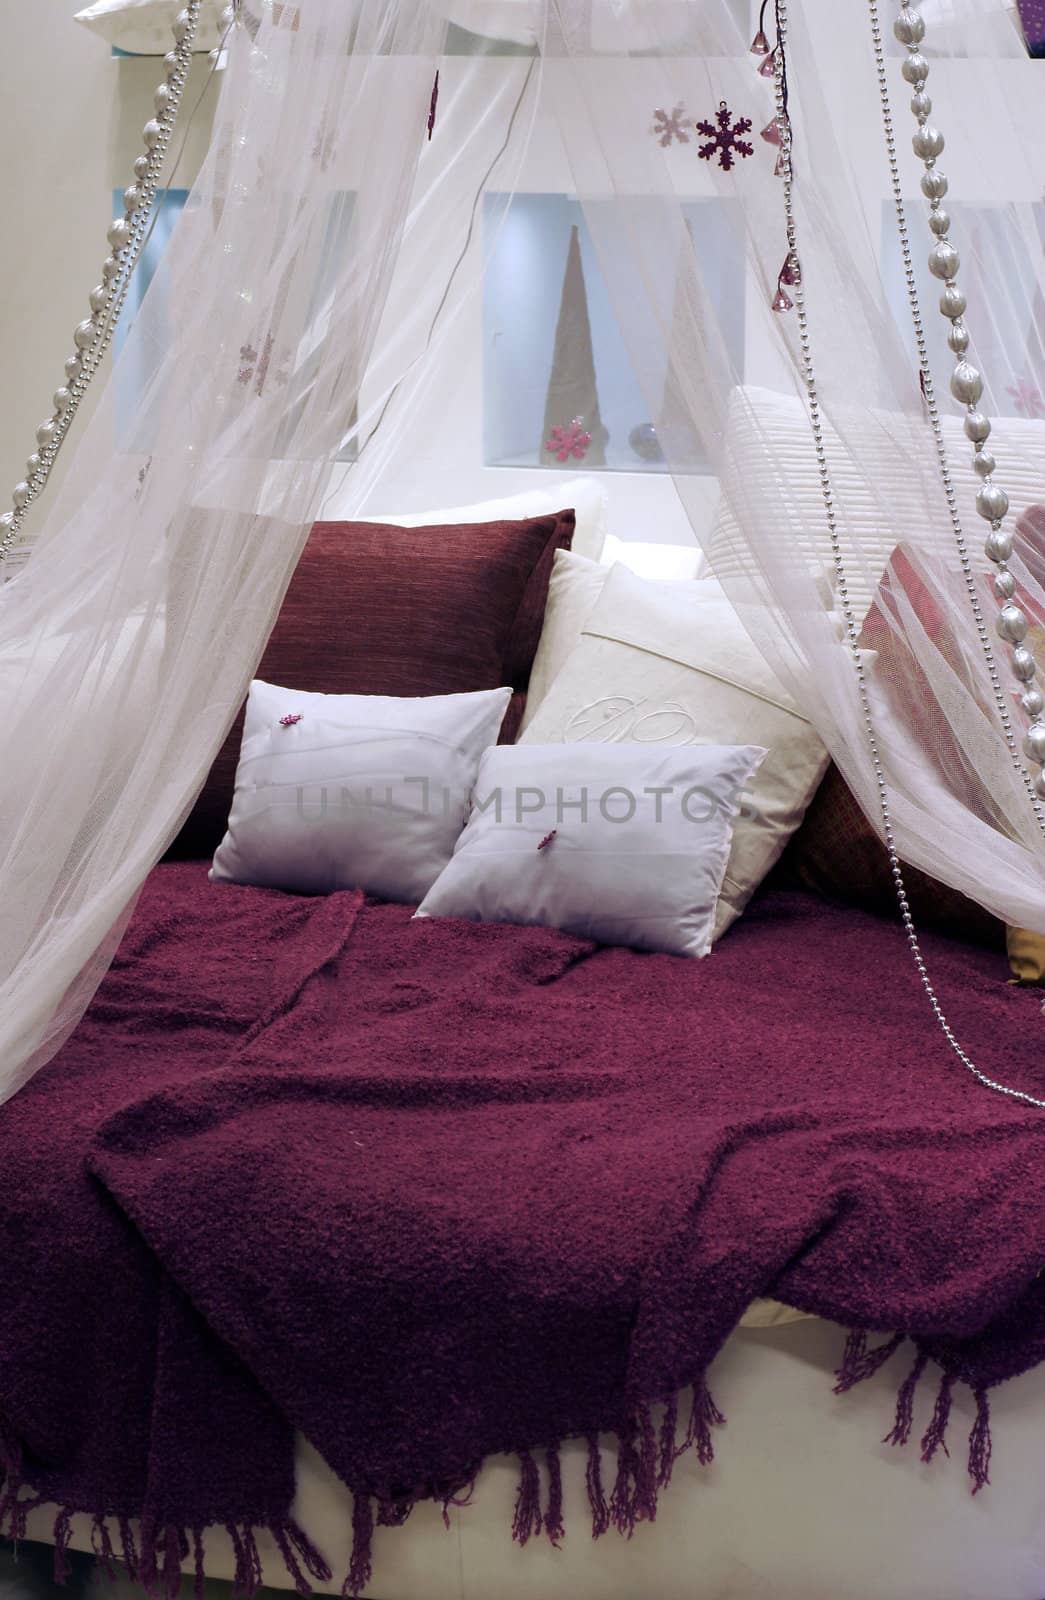 Round bed with pillow by coverlet, transparent blind and decorations